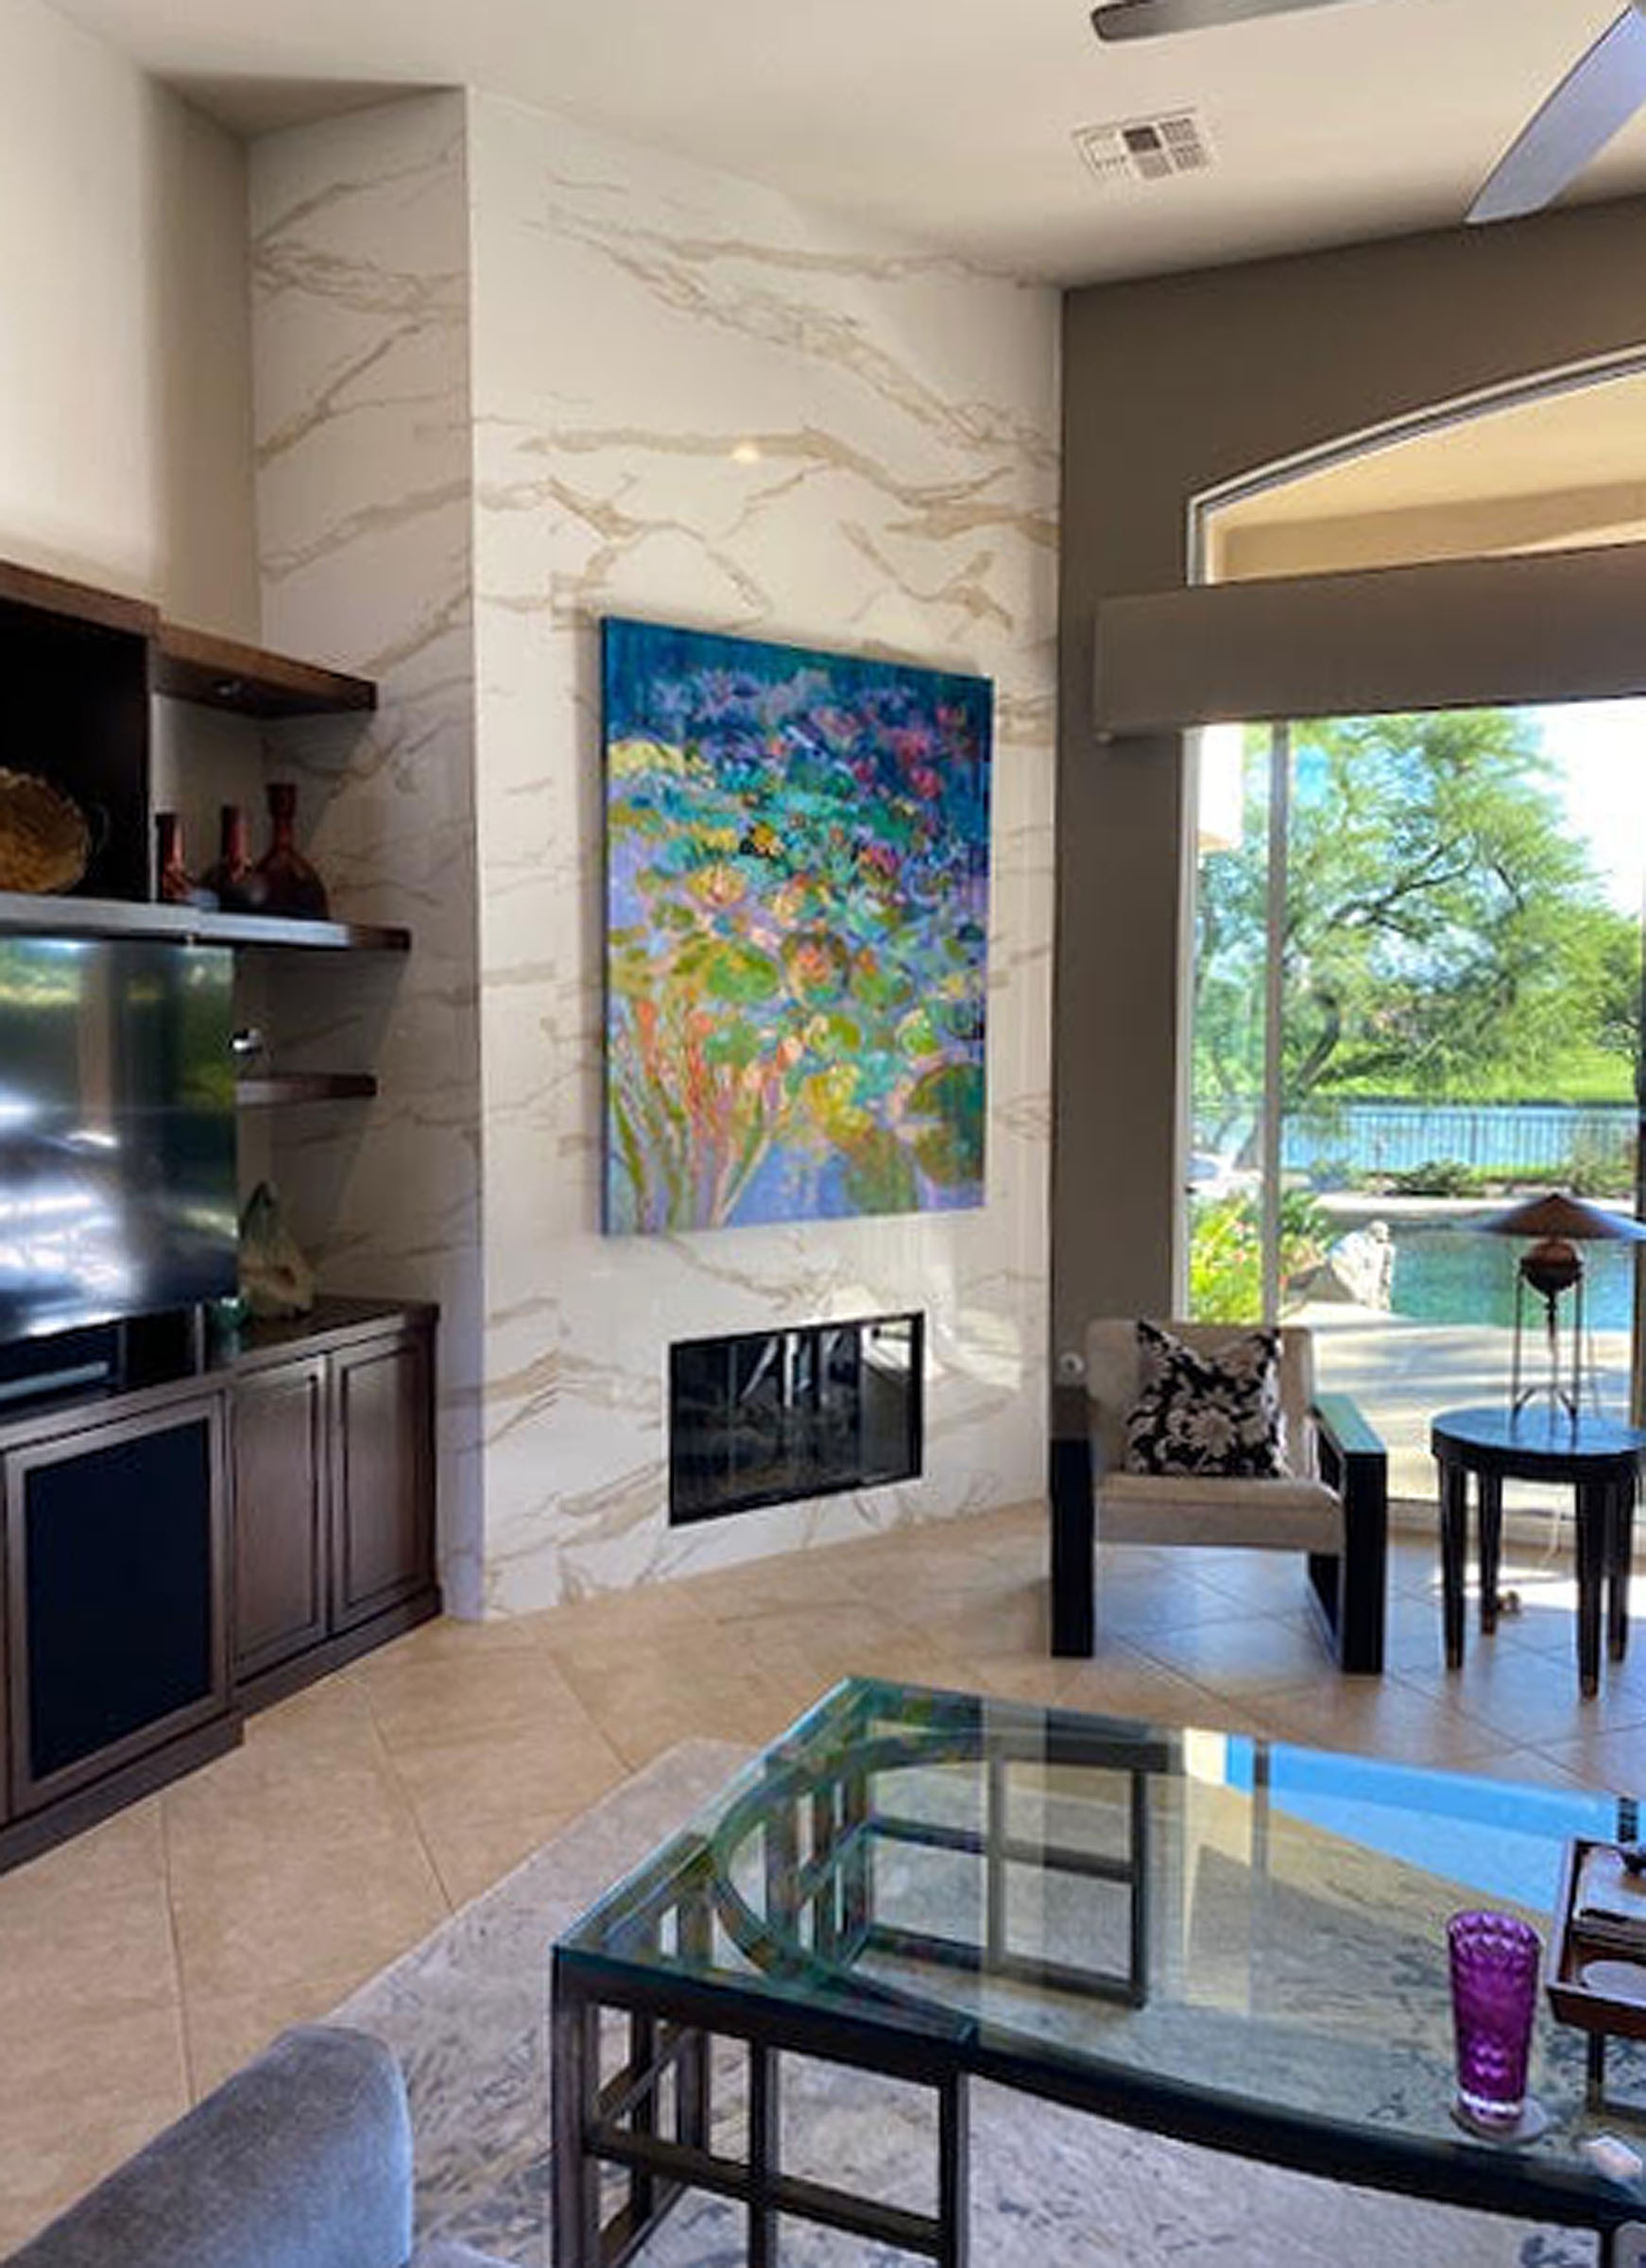 Oversize Abstract Floral Oil Painting for a Marble Fireplace. Waterlilies in a California Desert Residence